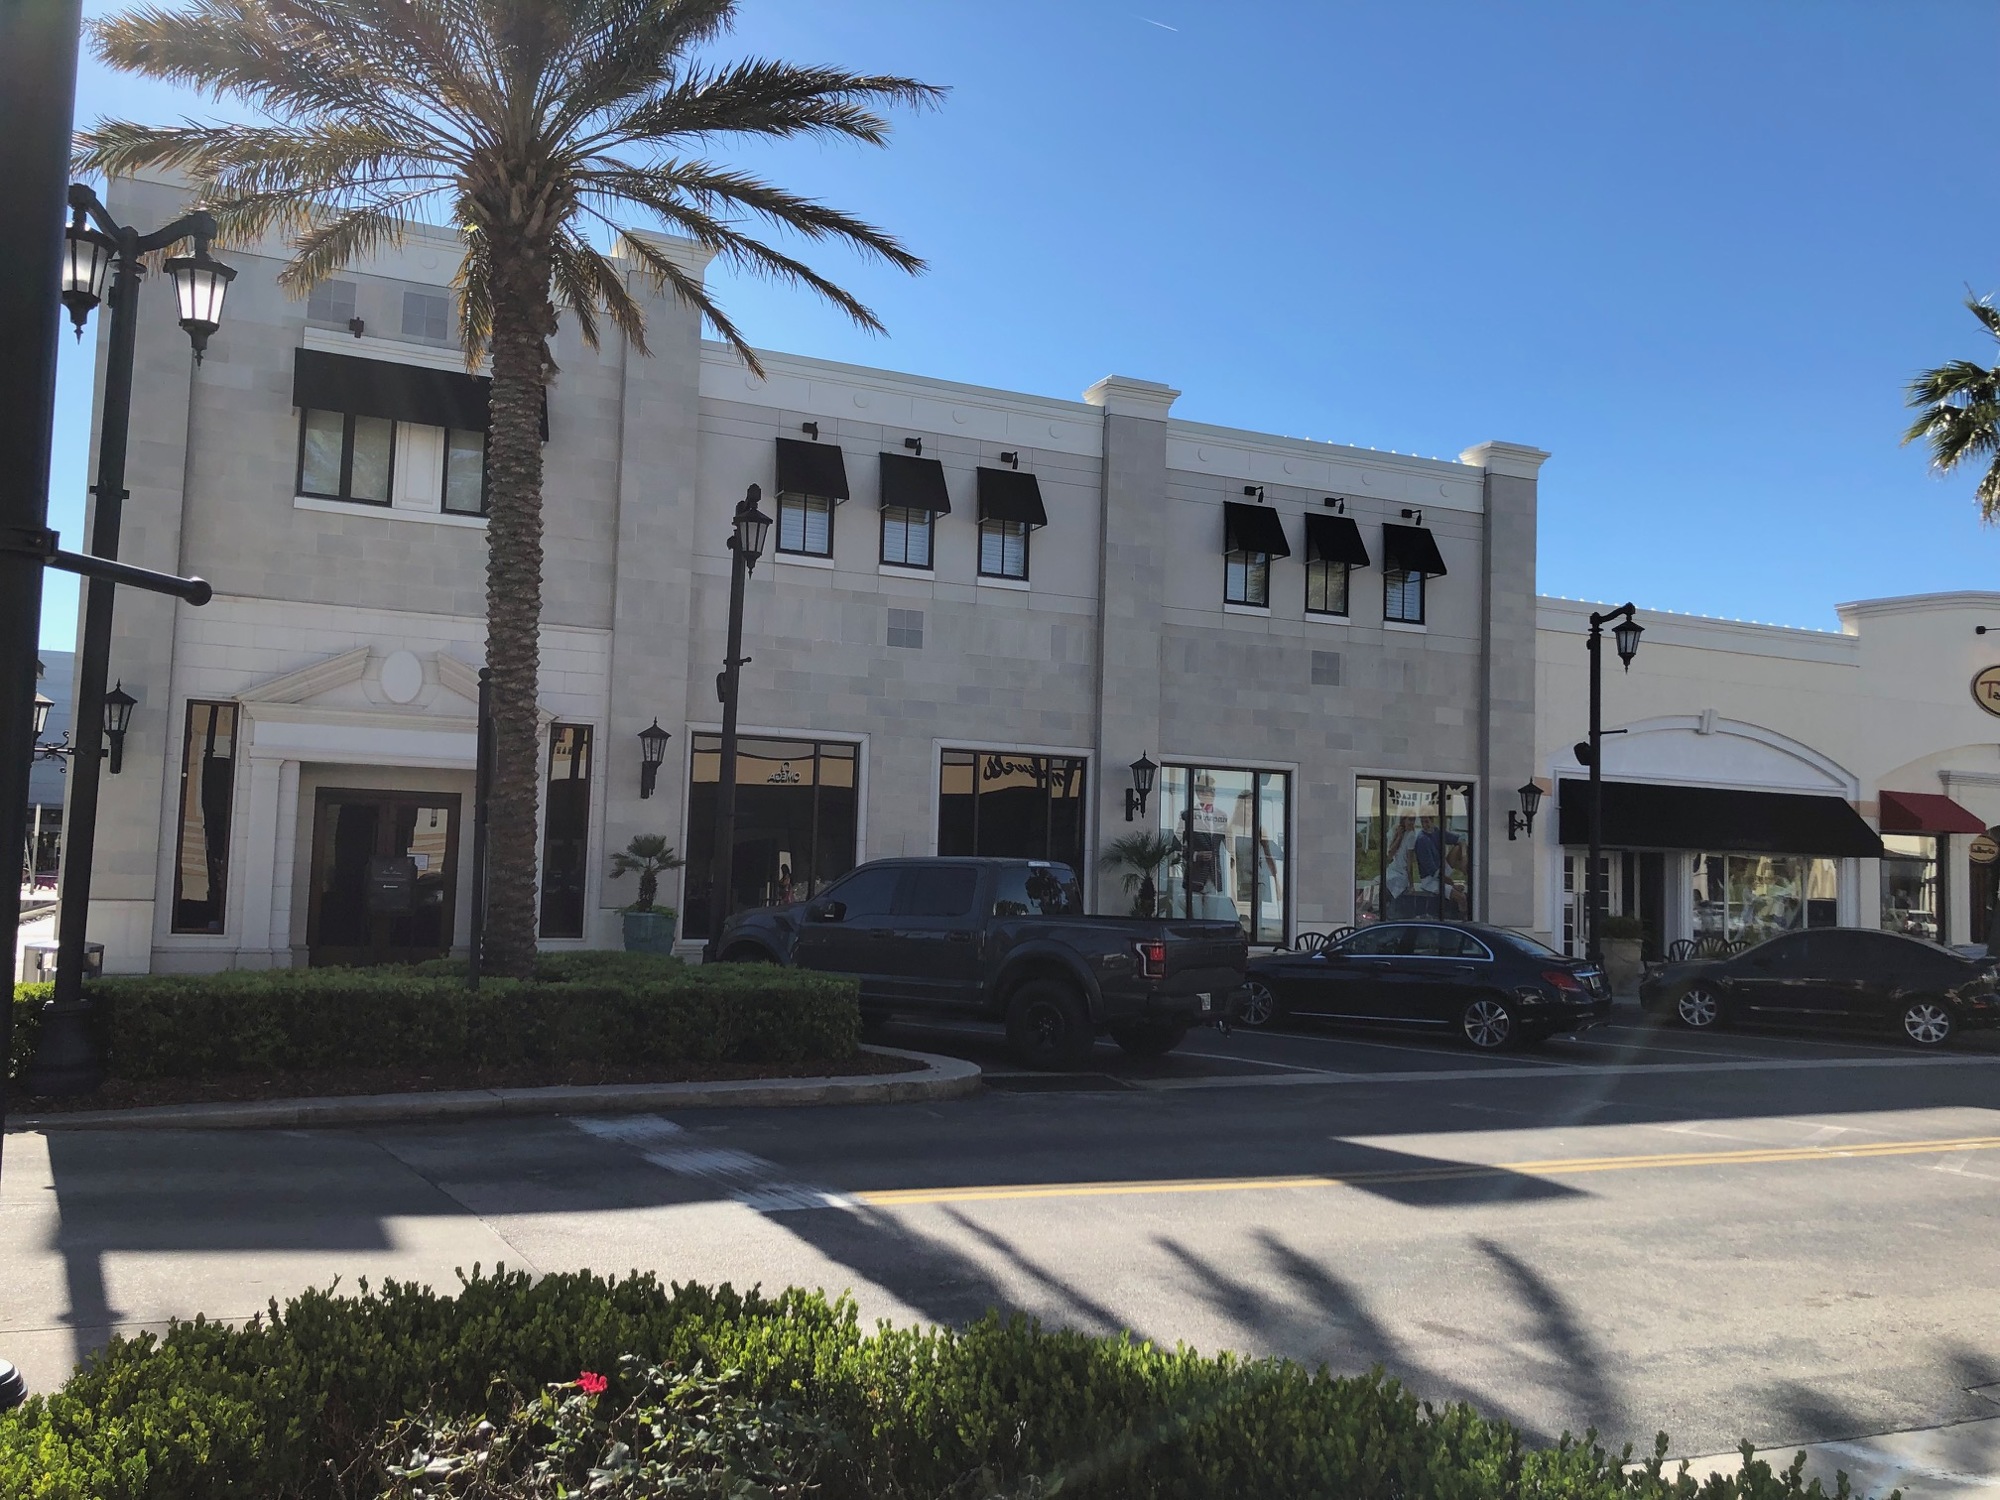 Tommy Bahama will occupy the left side of this building, while Brooks Brothers will take the right side including the former bareMinerals store at the far right.